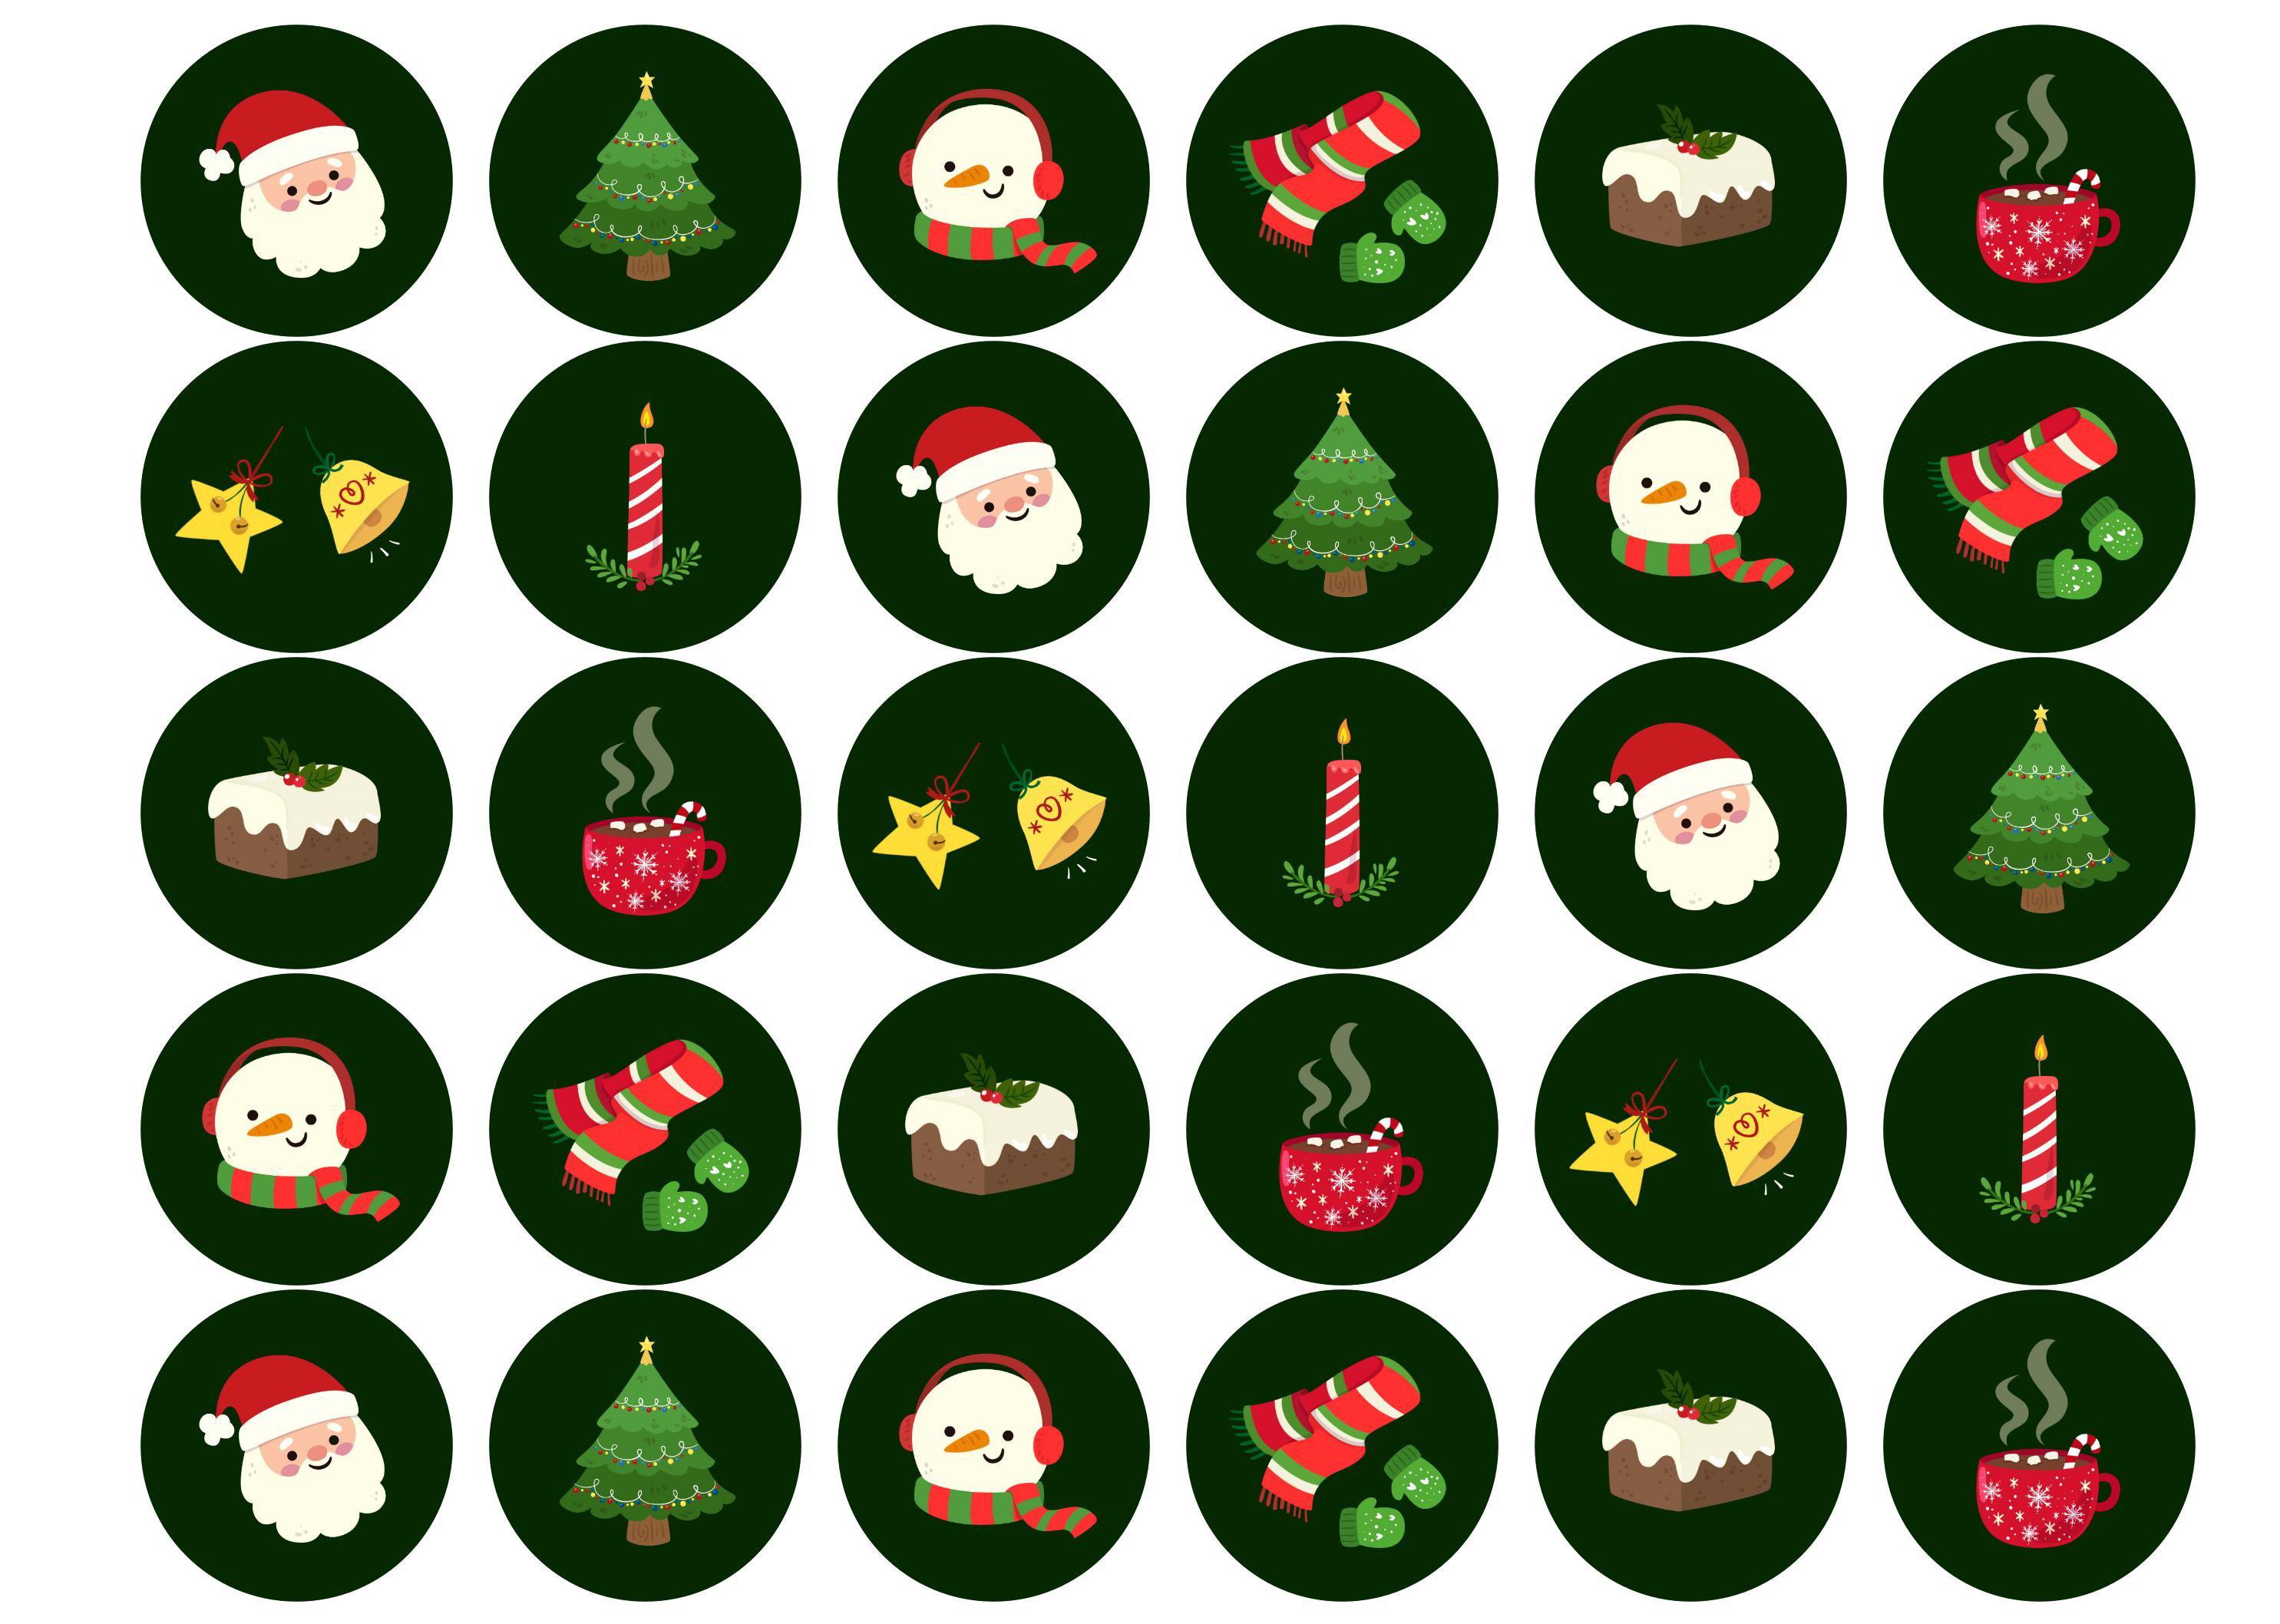 30 edible Christmas toppers with a range of Christmas images